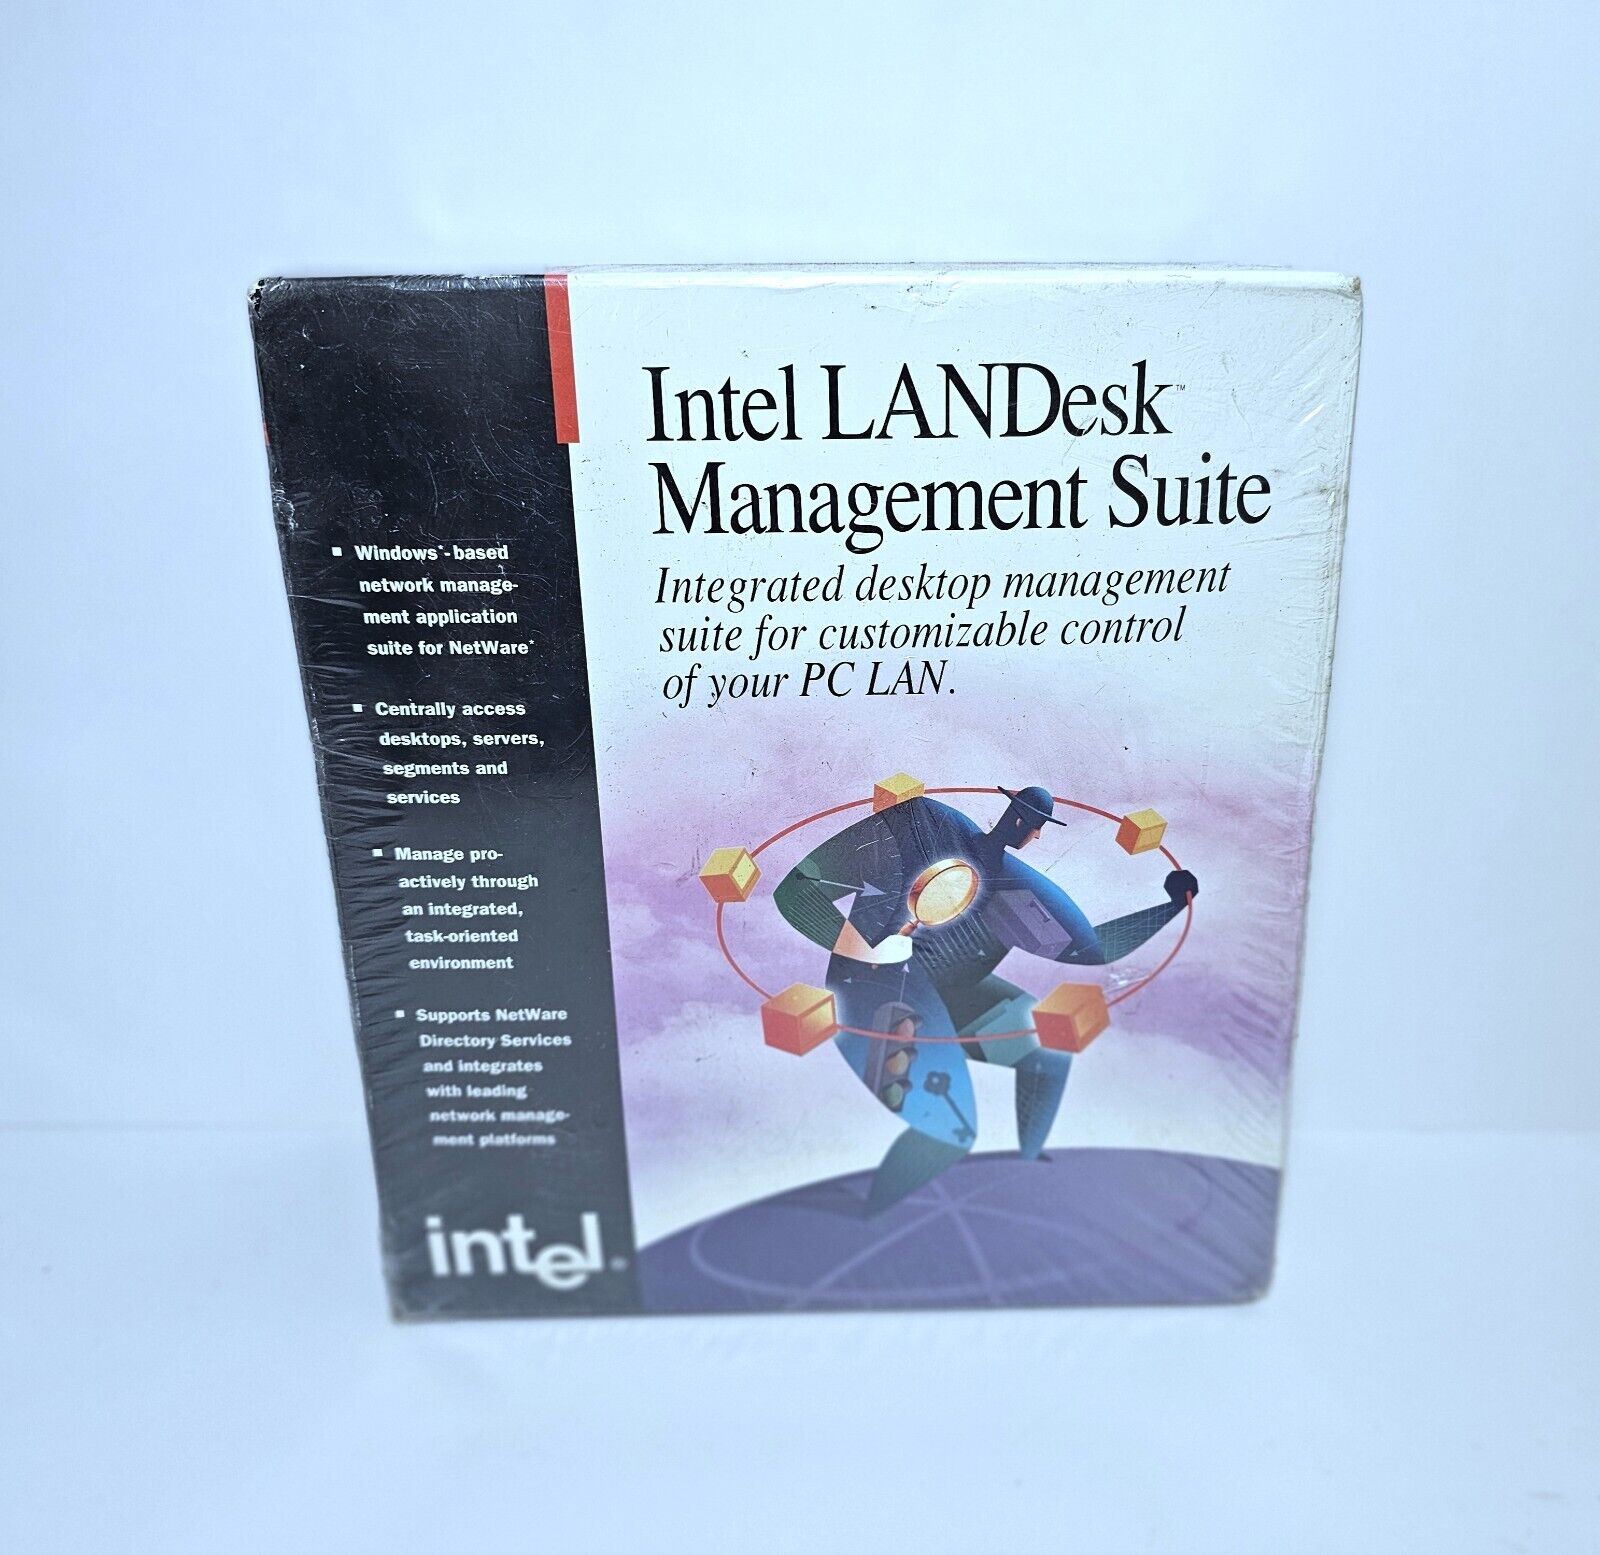 Intel LANDesk Management Suite Ver 2.01 For Customizable Control of Your PC LAN